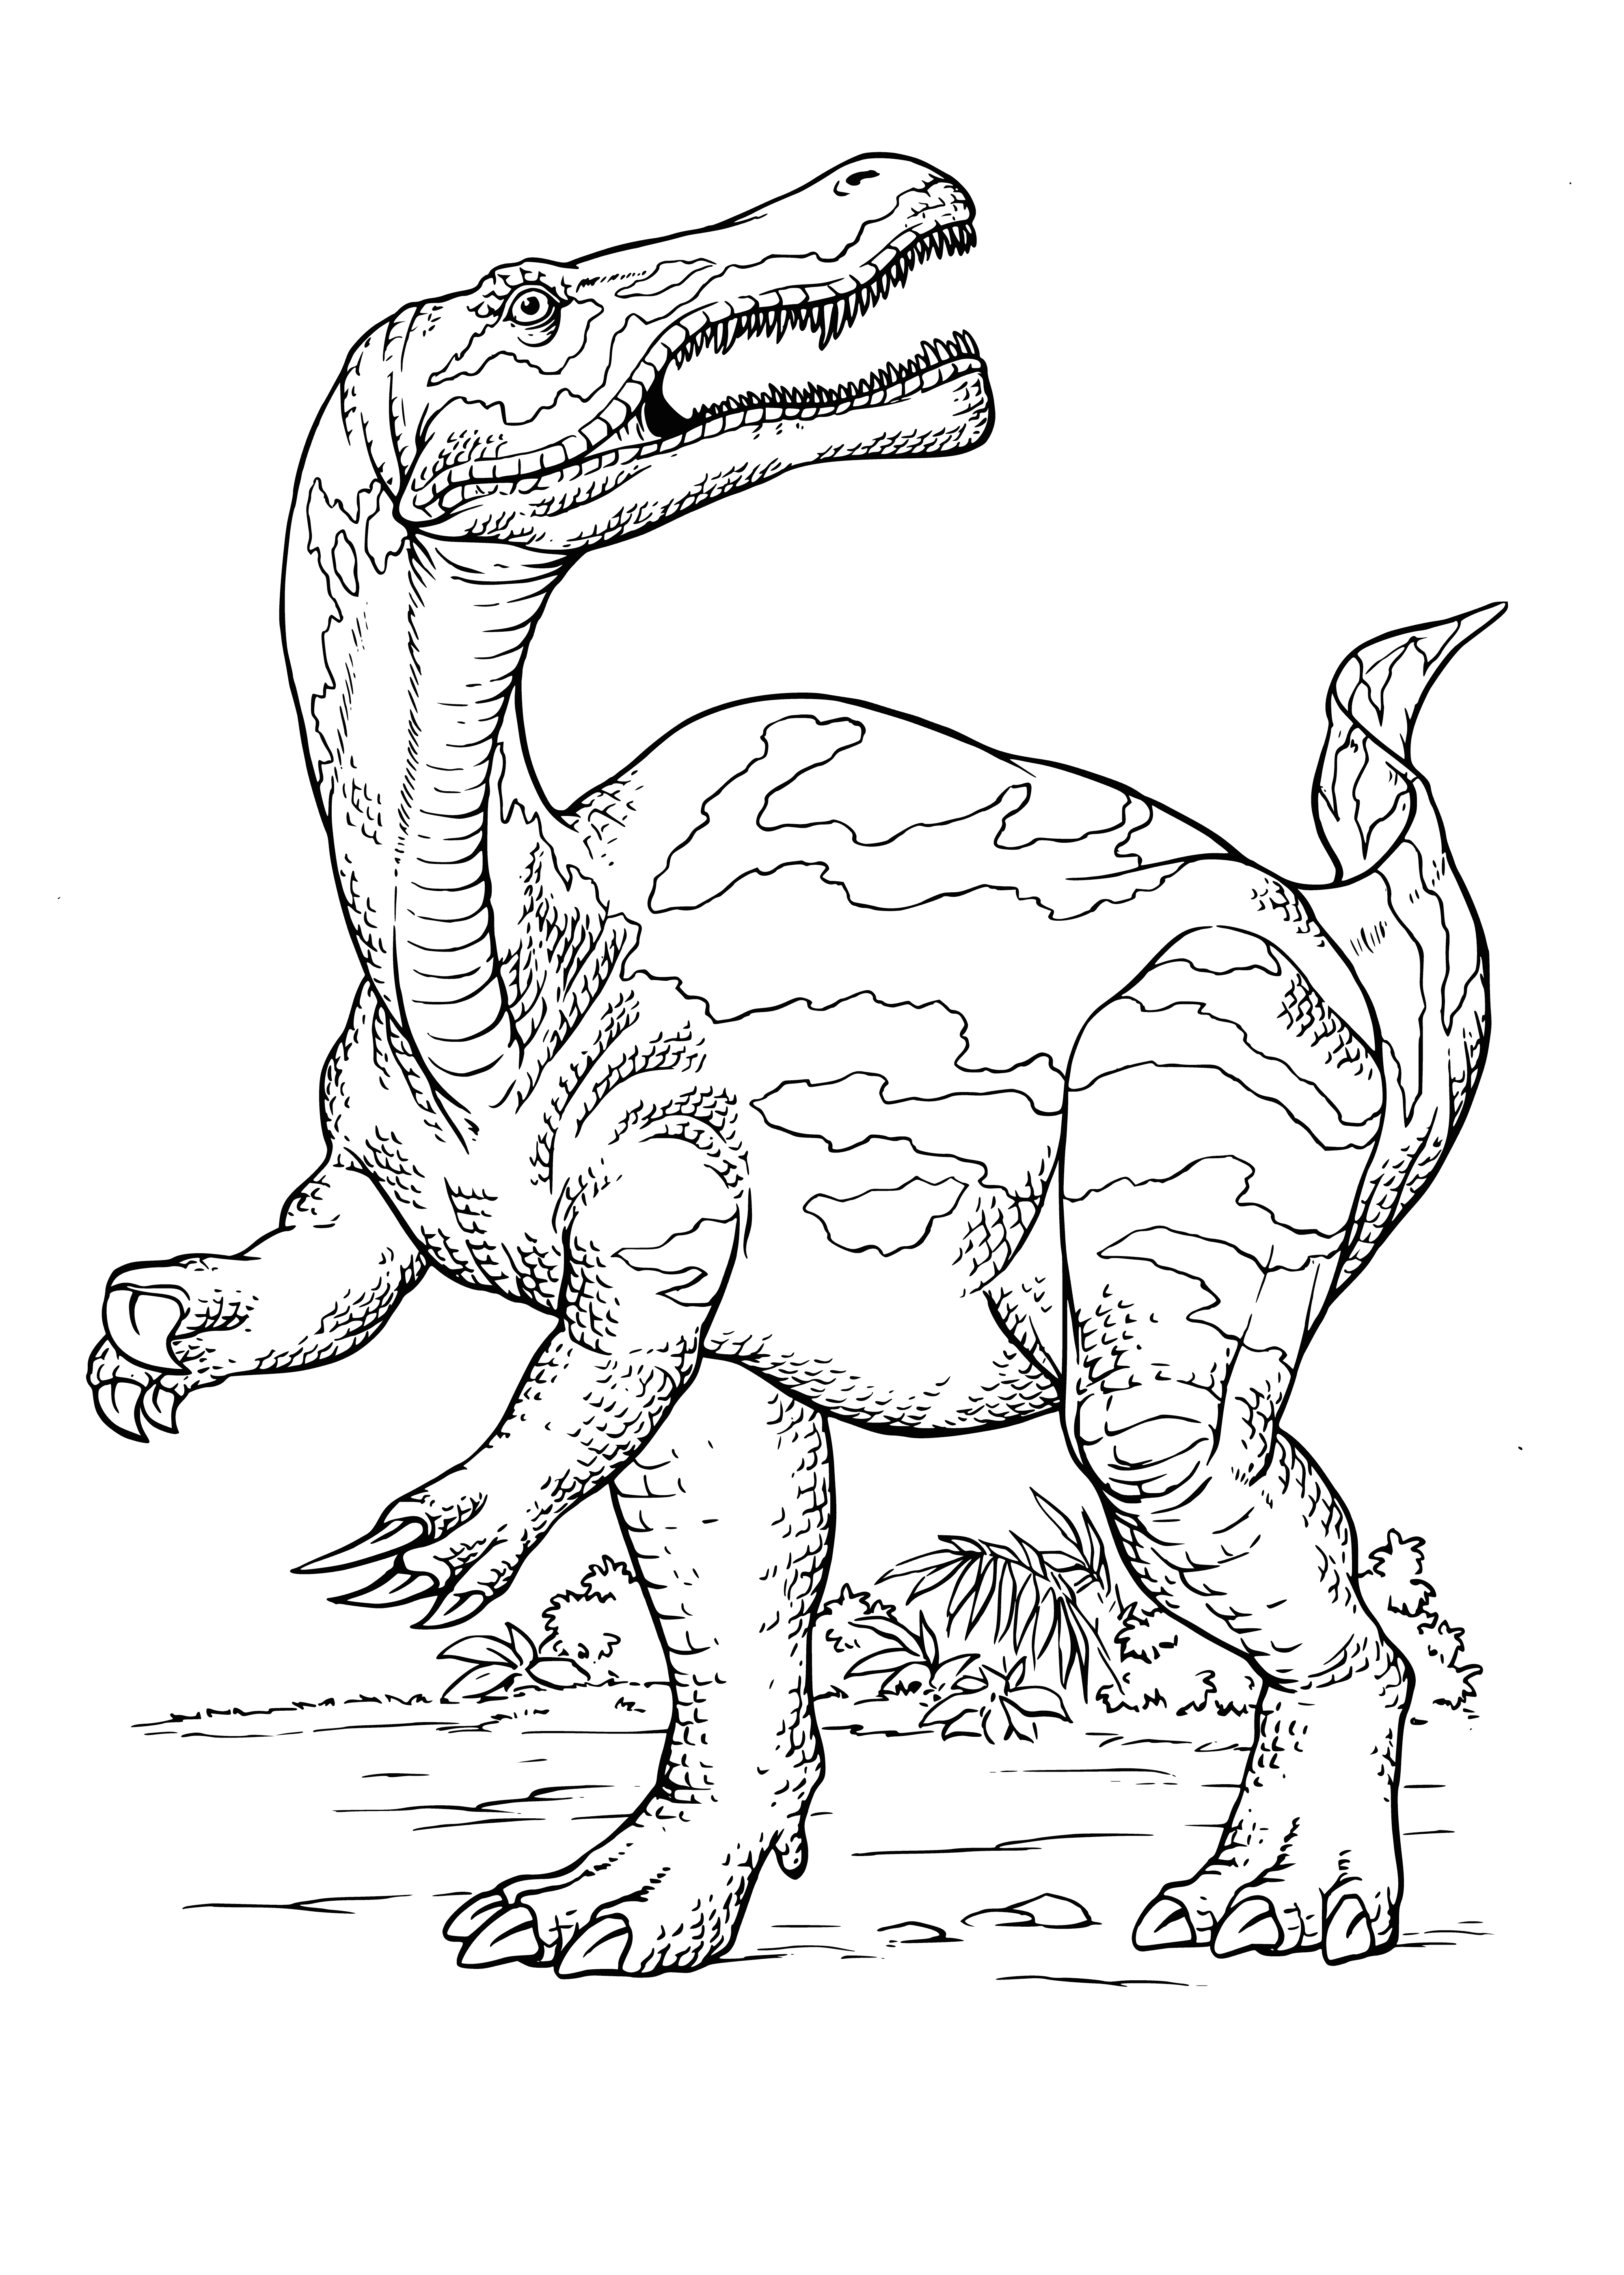 coloring page: A large green dinosaur with a long tail, big head & sharp teeth is depicted on the coloring page.